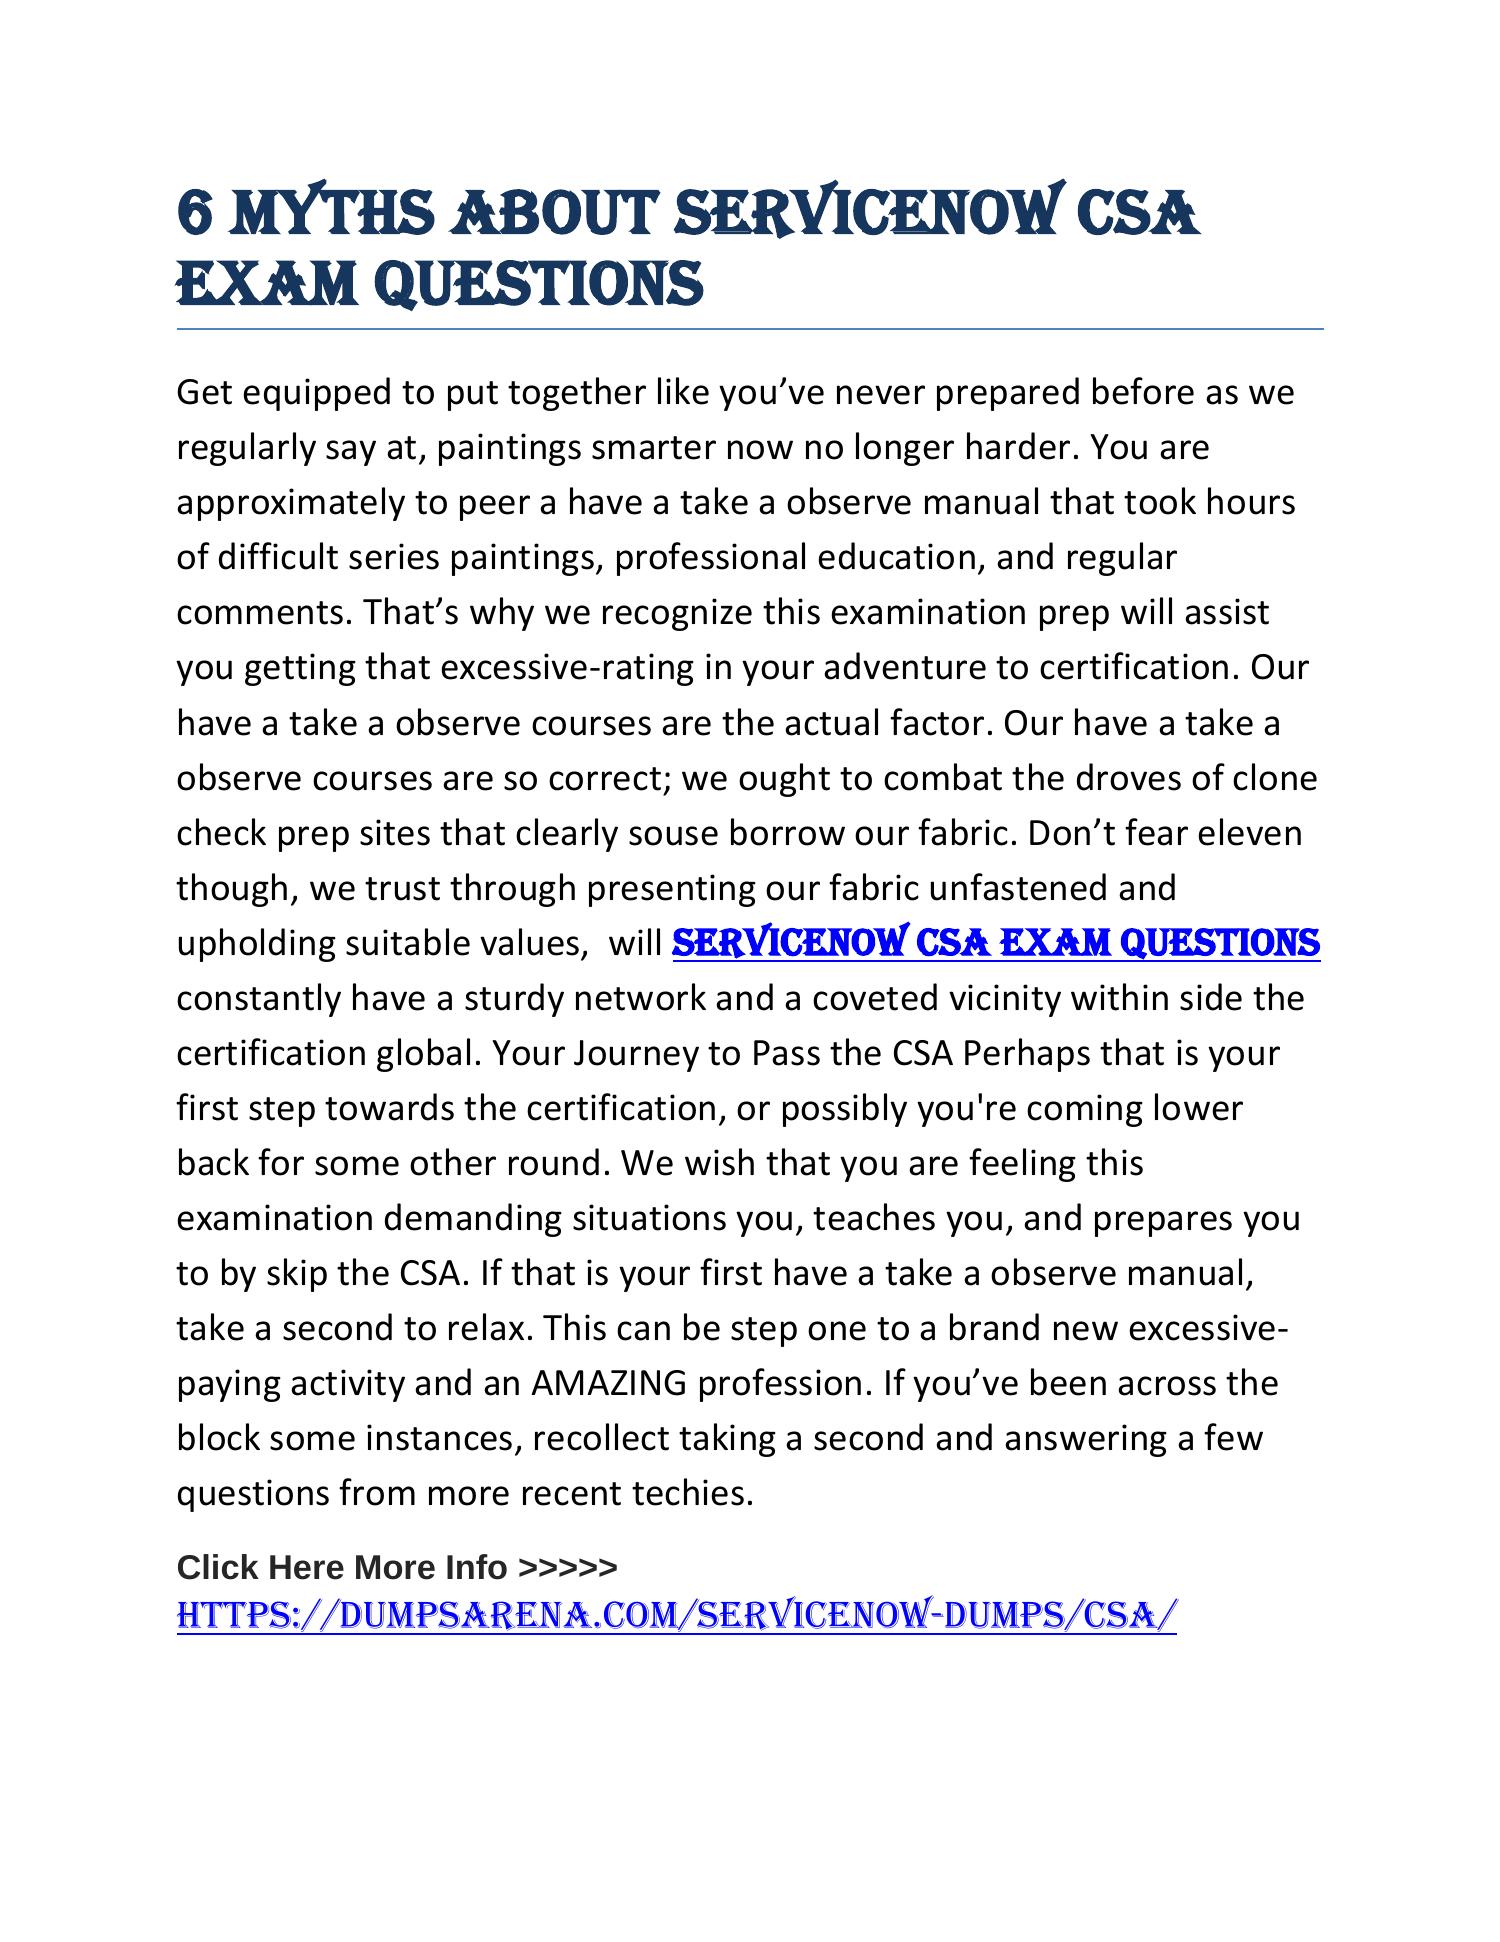 servicenow csa exam questions.docx DocDroid